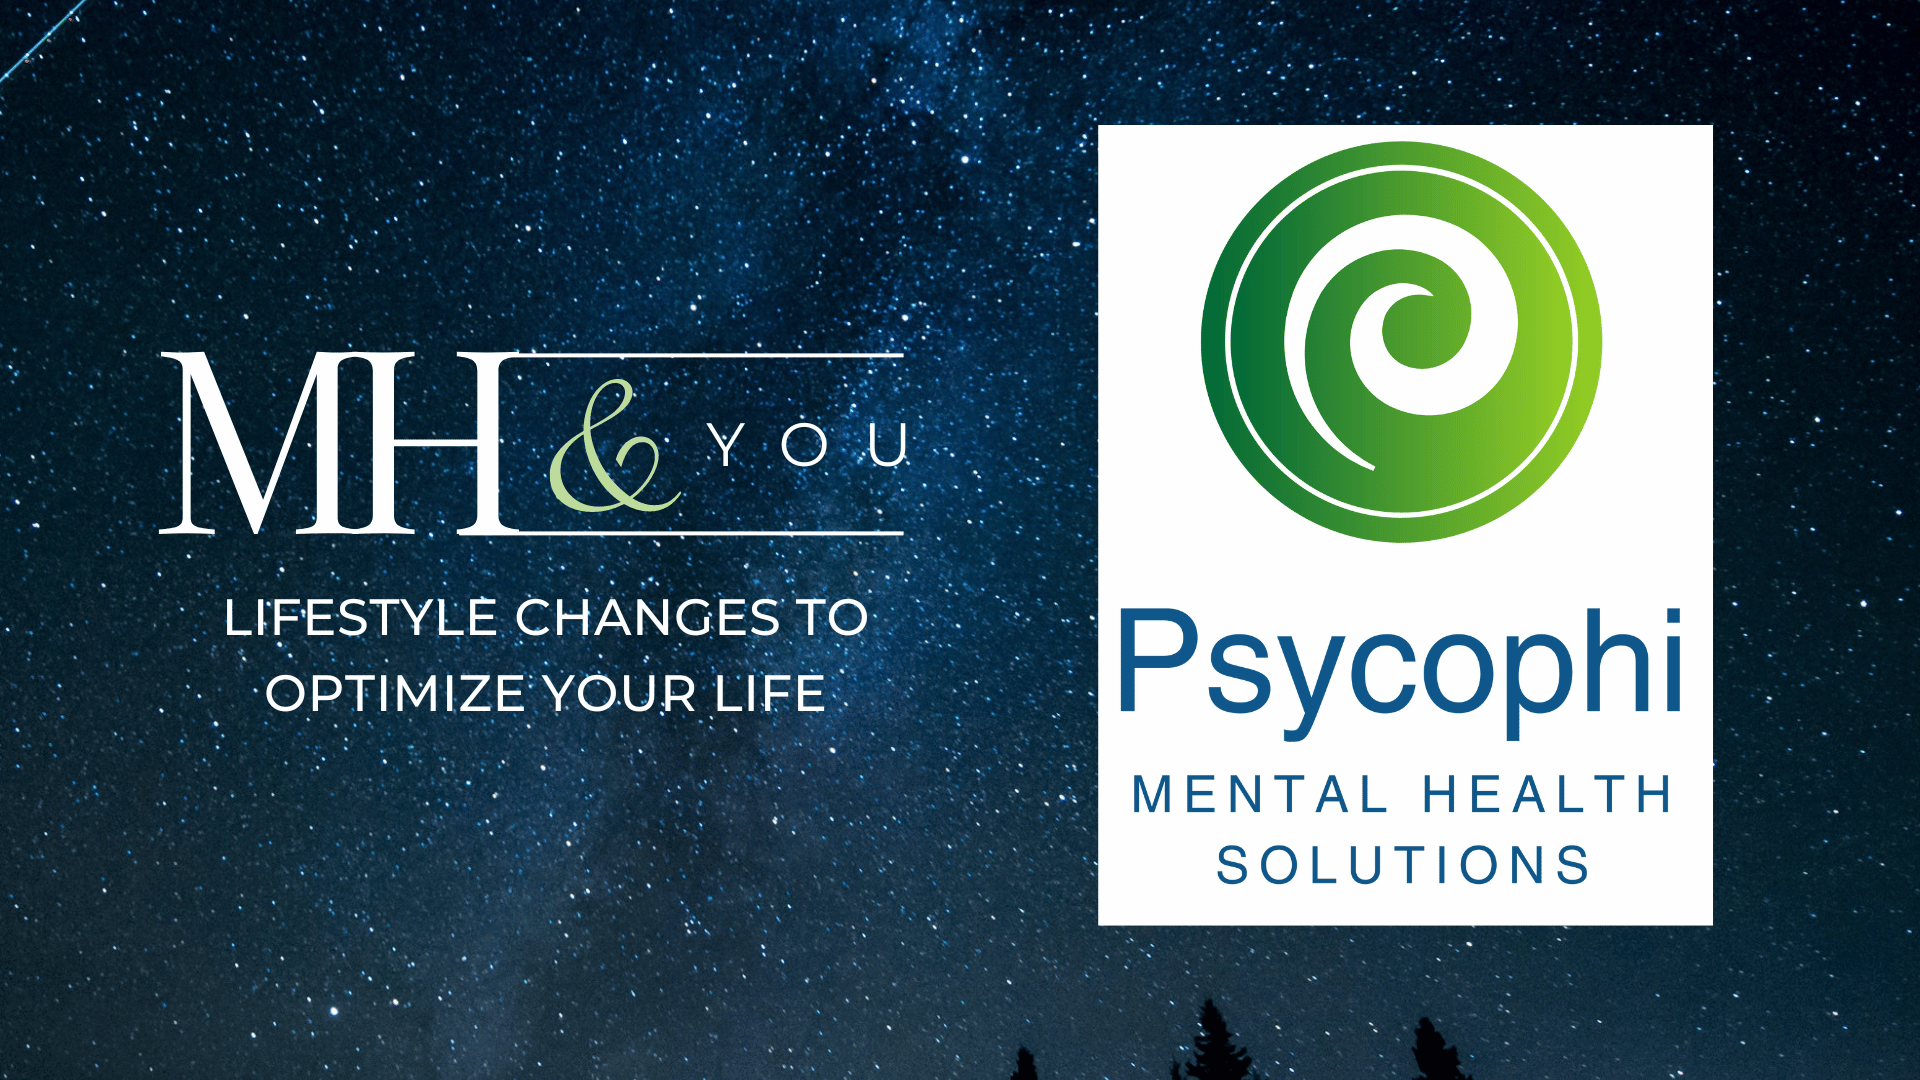 Introduction to the newest course by Psycophi - Mental Health & YOU: Lifestyle Changes to Optimize Your Life.